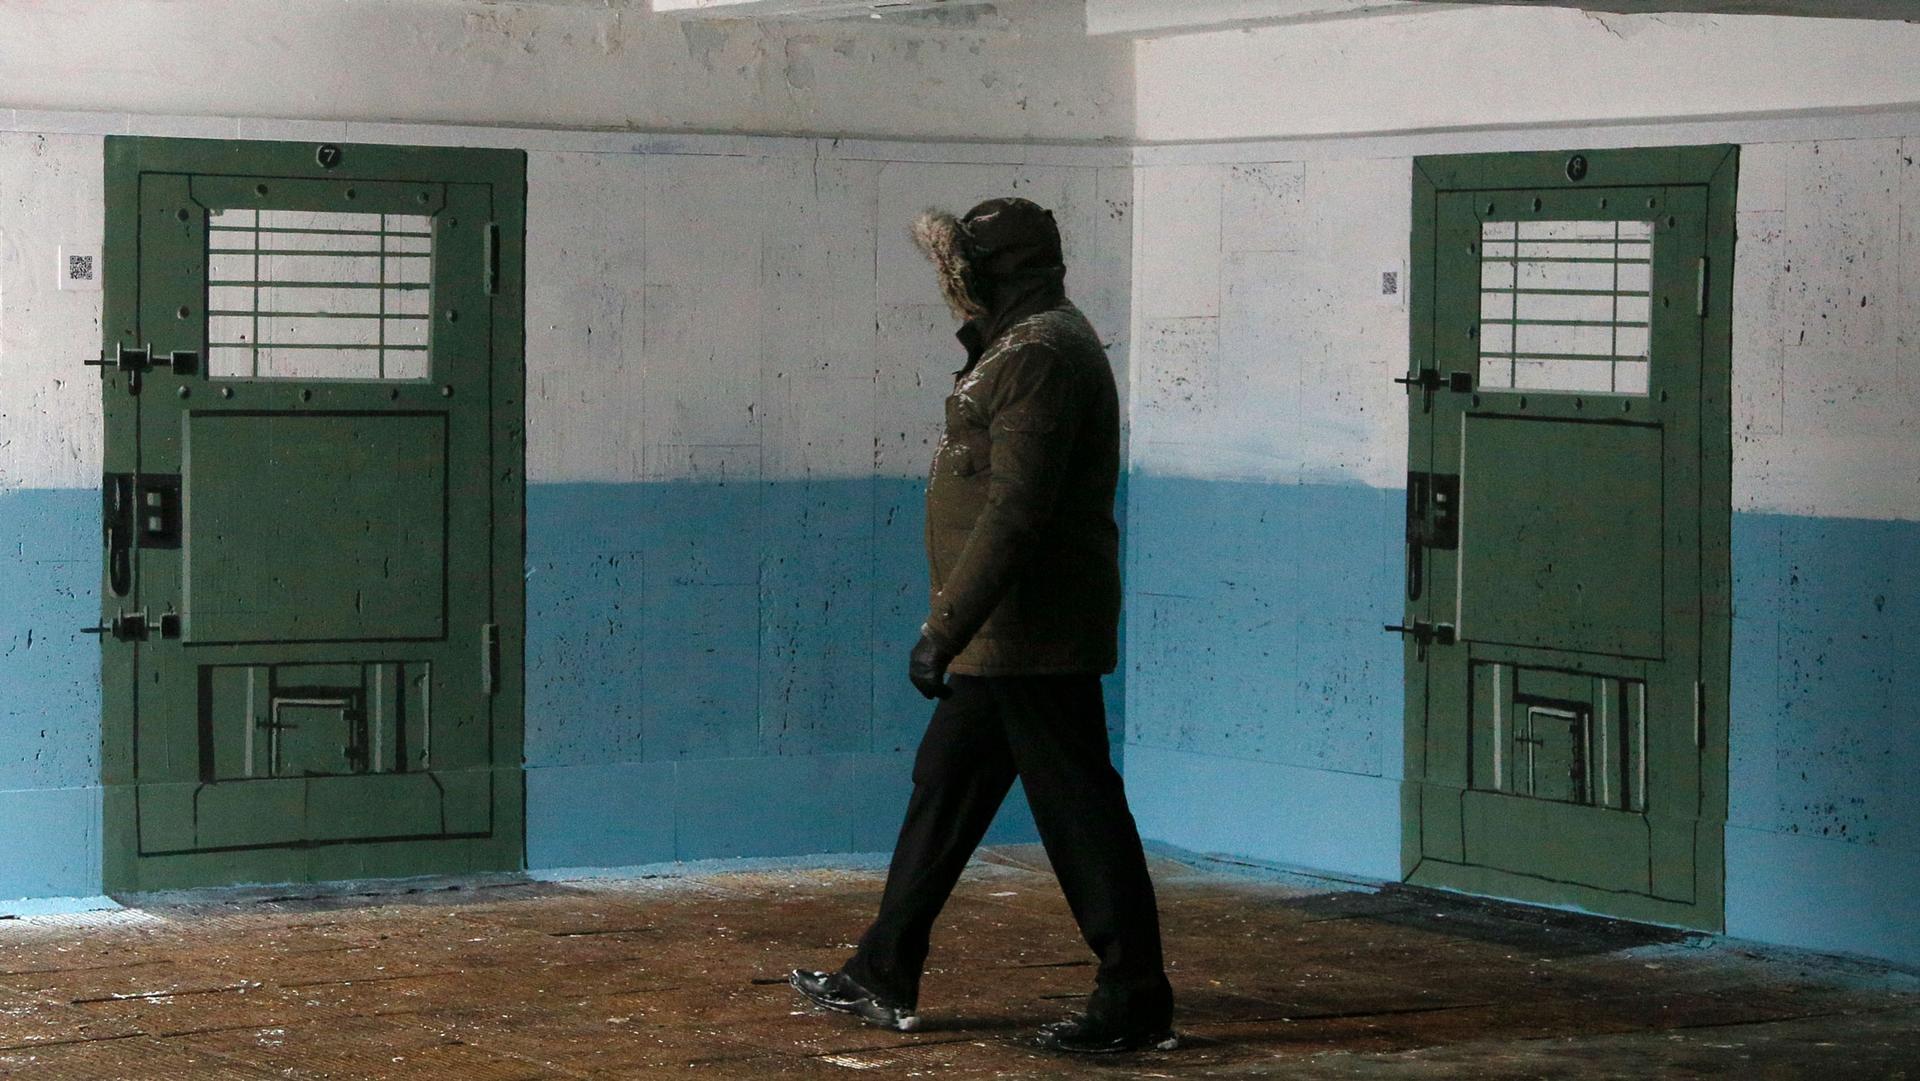 A person wearing a jacket with a hood up is shown walking past a wall with two prison doors painted on it.